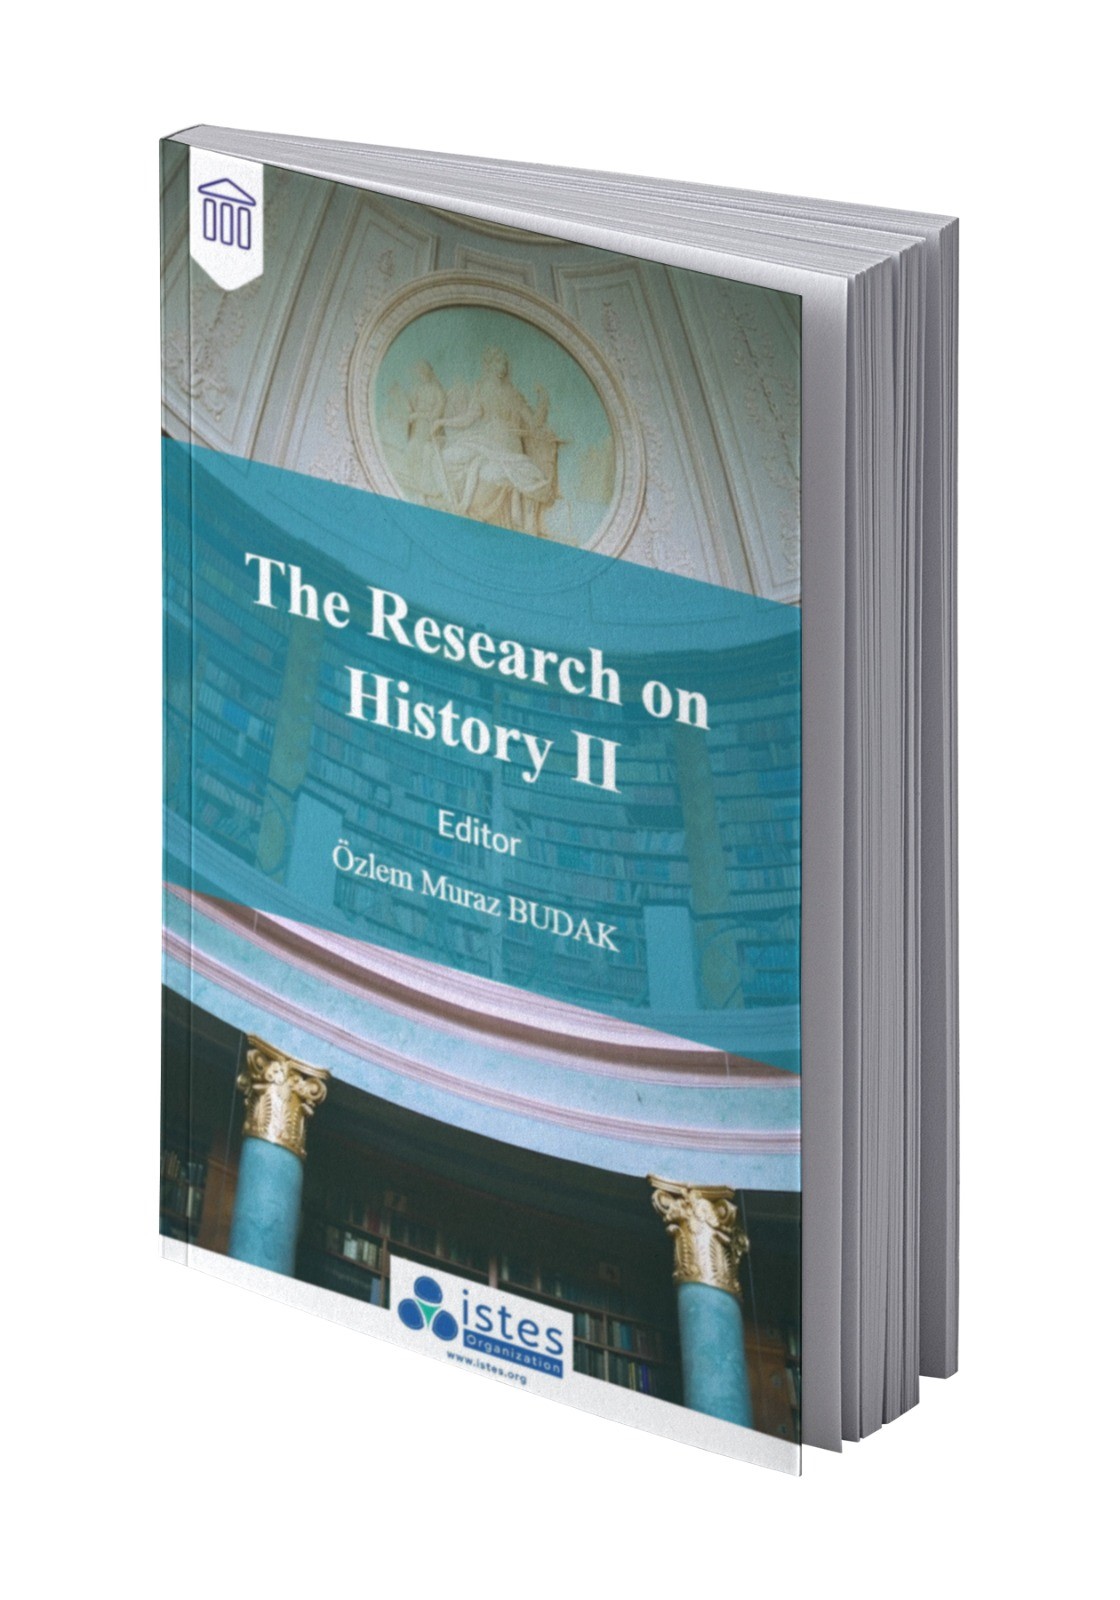 The Research on History II